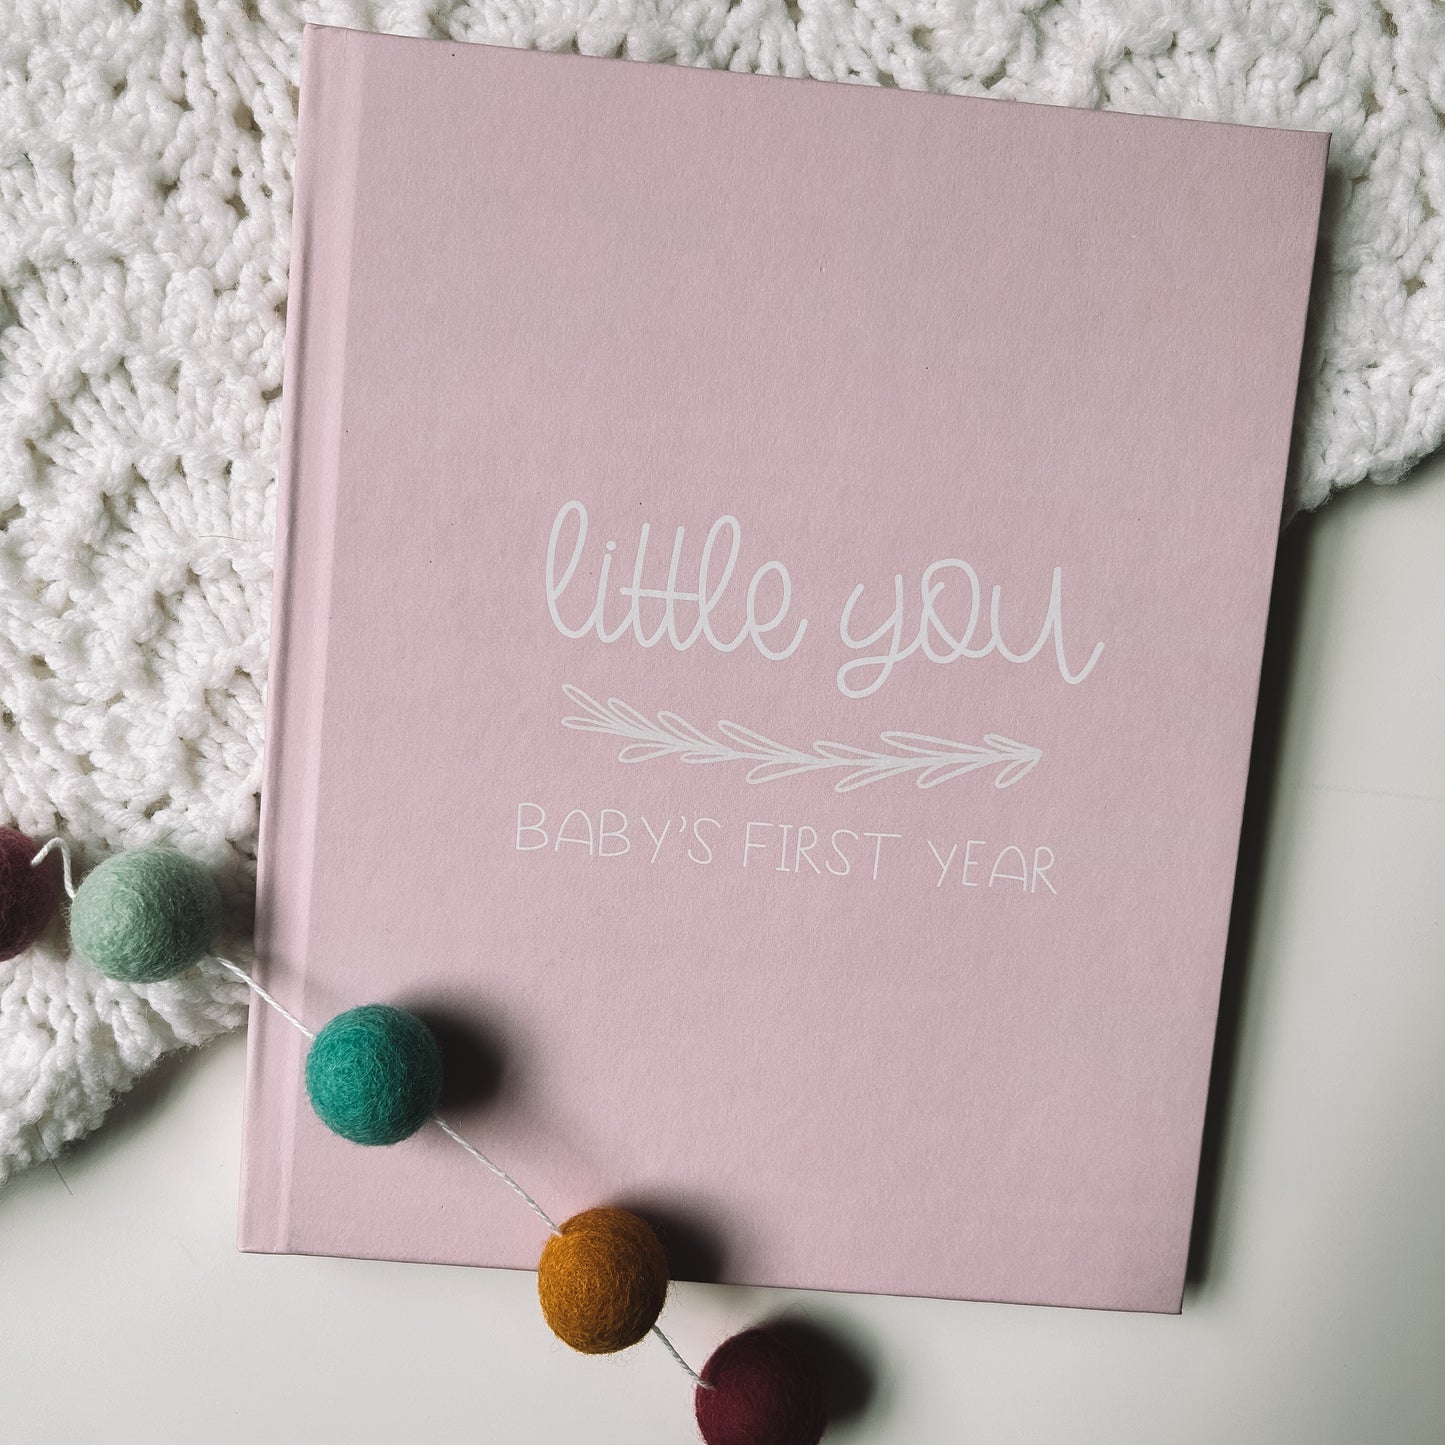 Keepsake baby book with a pink cover titled Little You Baby's First Year in white text.